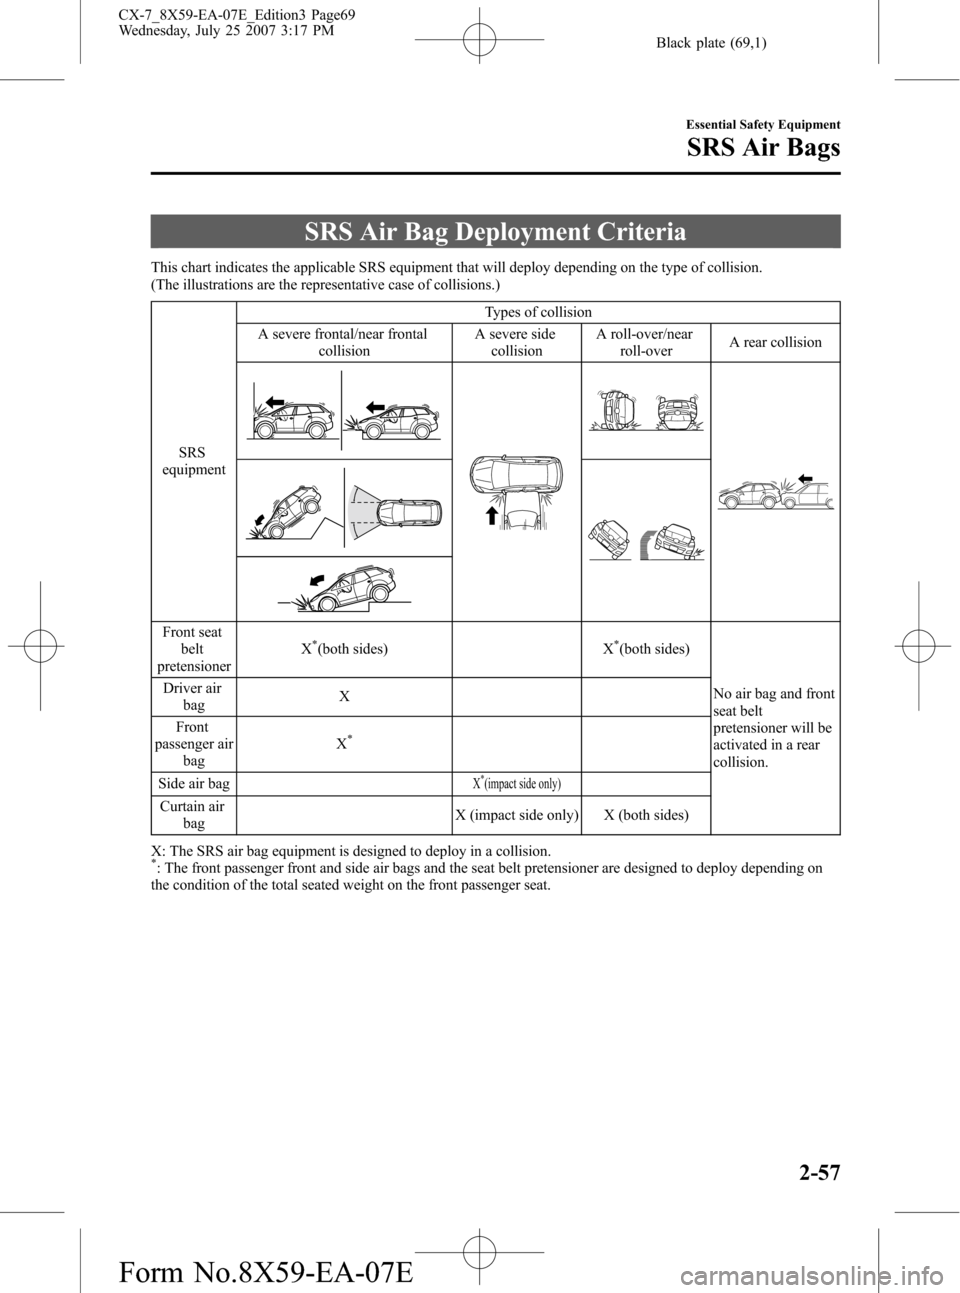 MAZDA MODEL CX-7 2008  Owners Manual (in English) Black plate (69,1)
SRS Air Bag Deployment Criteria
This chart indicates the applicable SRS equipment that will deploy depending on the type of collision.
(The illustrations are the representative case